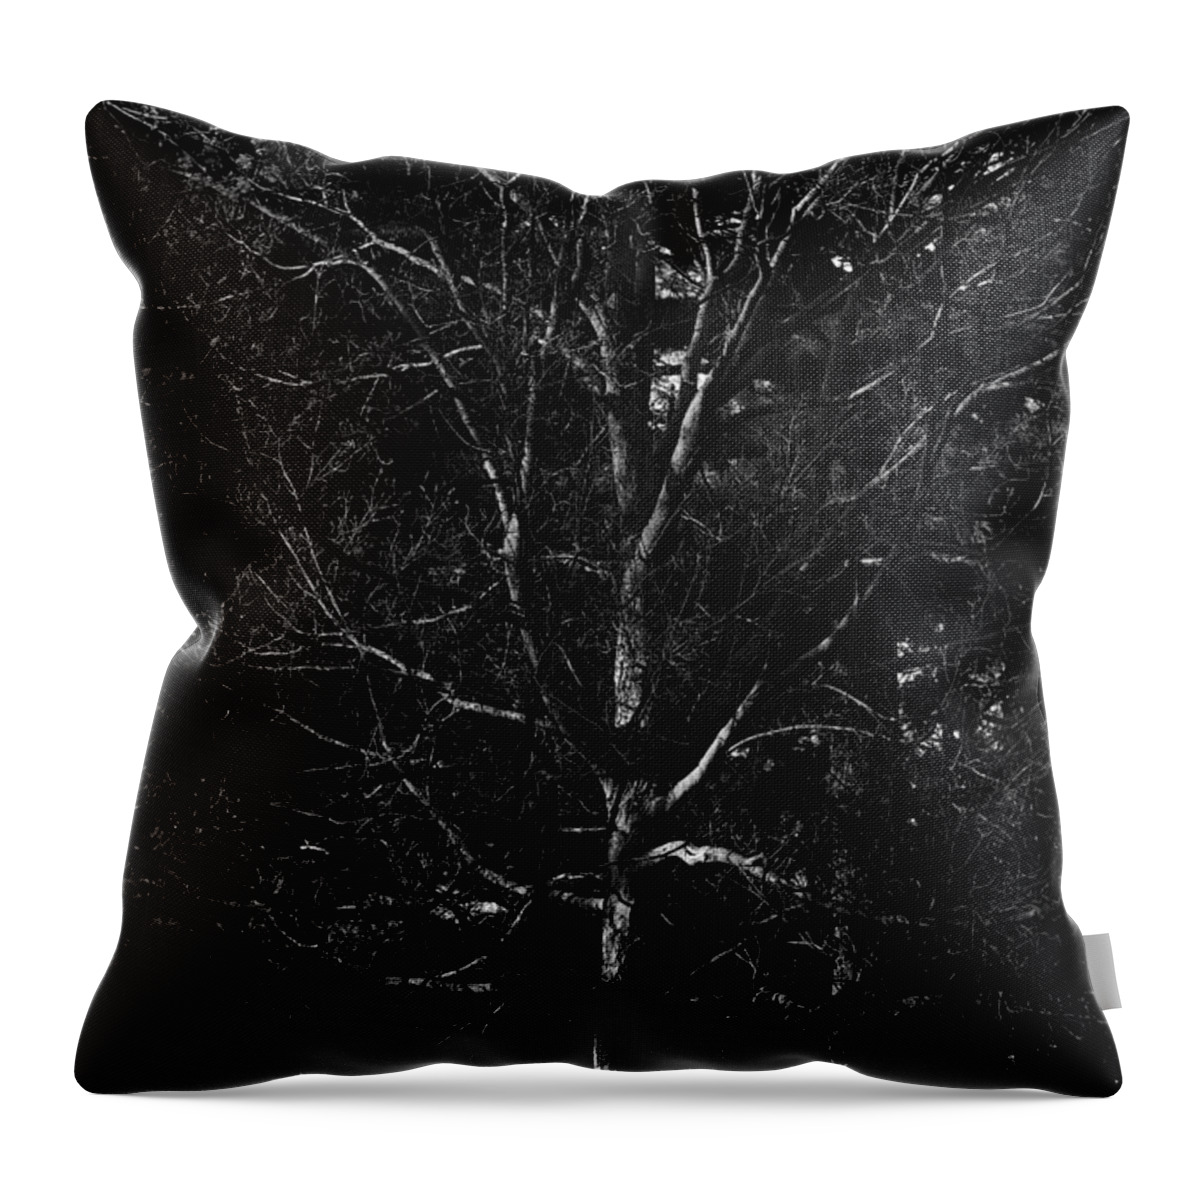 Branches Throw Pillow featuring the photograph Branch Patterns by Frank J Casella